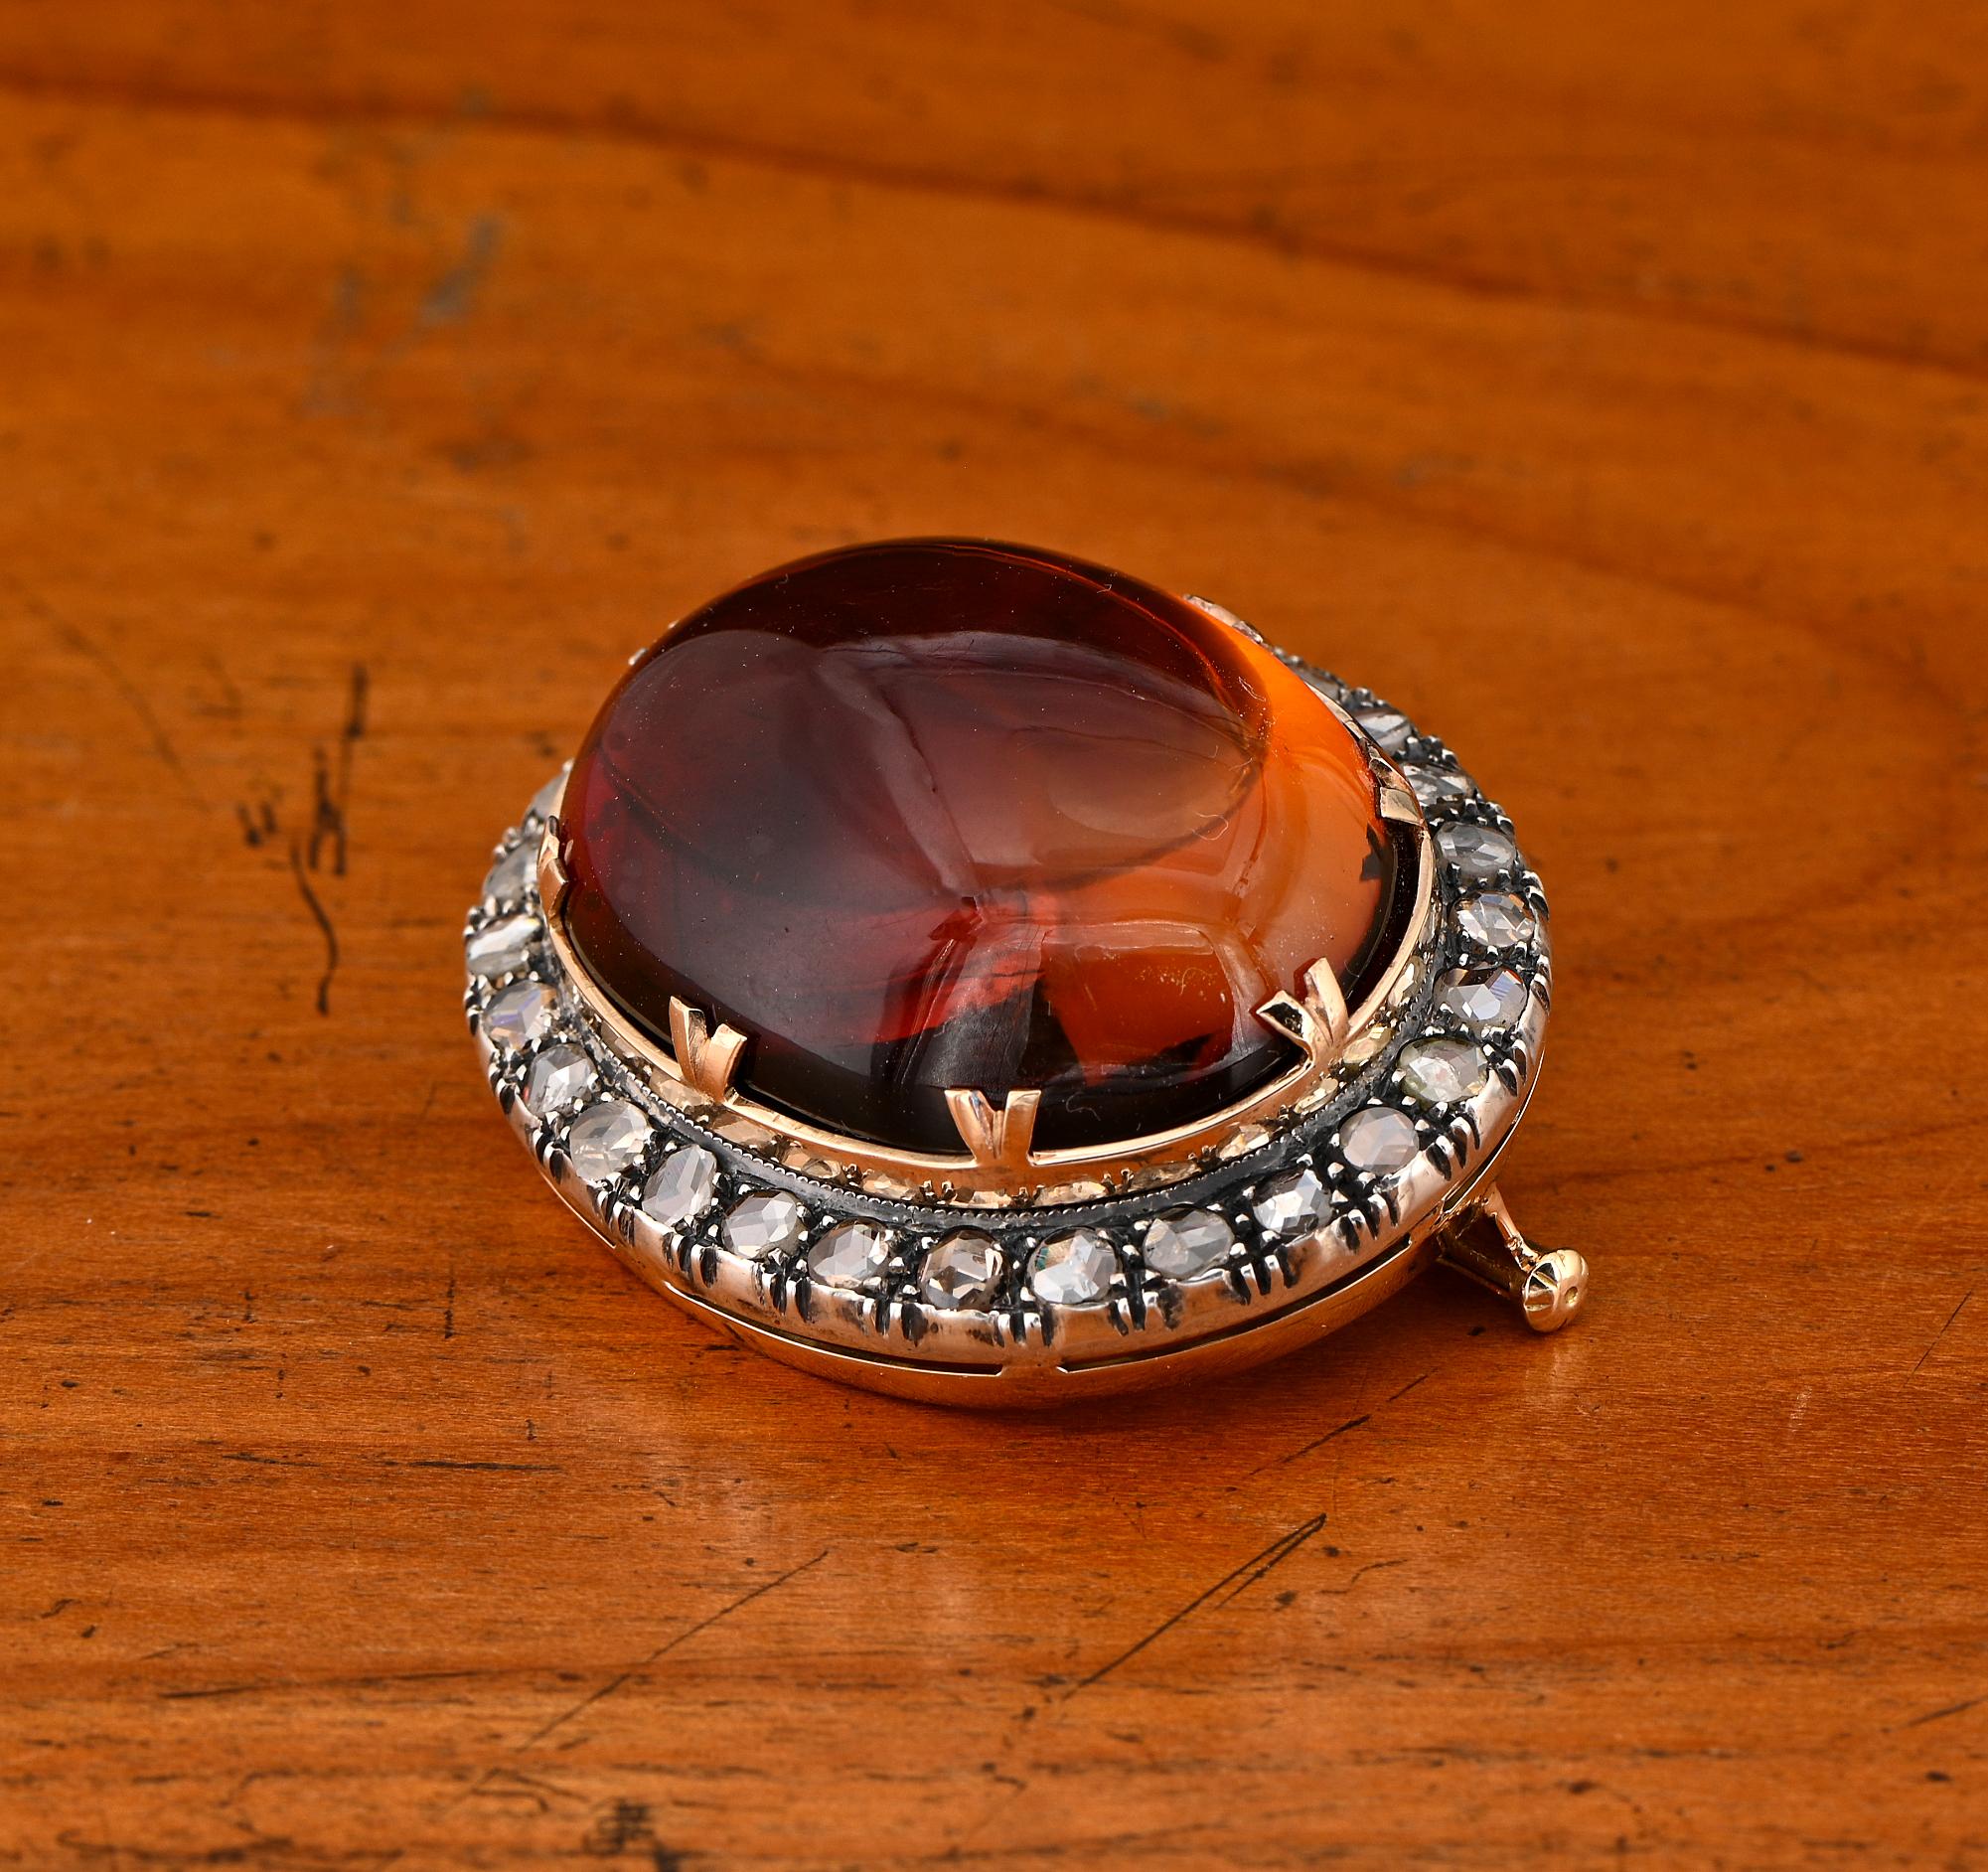 Women's Antique 30.00 Ct Baltic Amber and Rose Cut Diamond Brooch For Sale